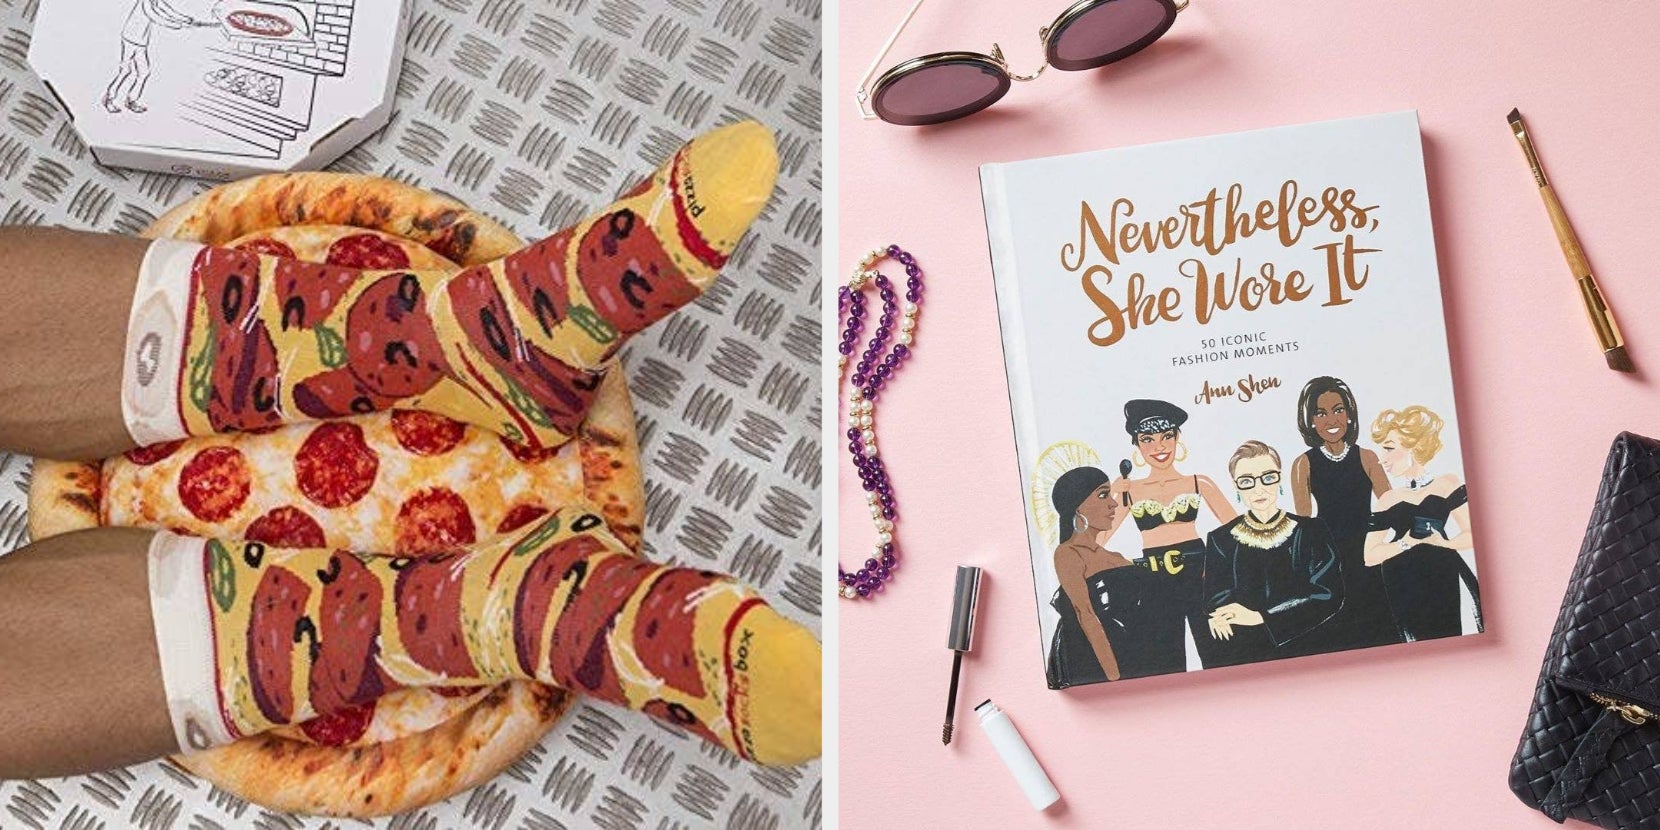 33 Cool Things To Buy, According To Teens 2021